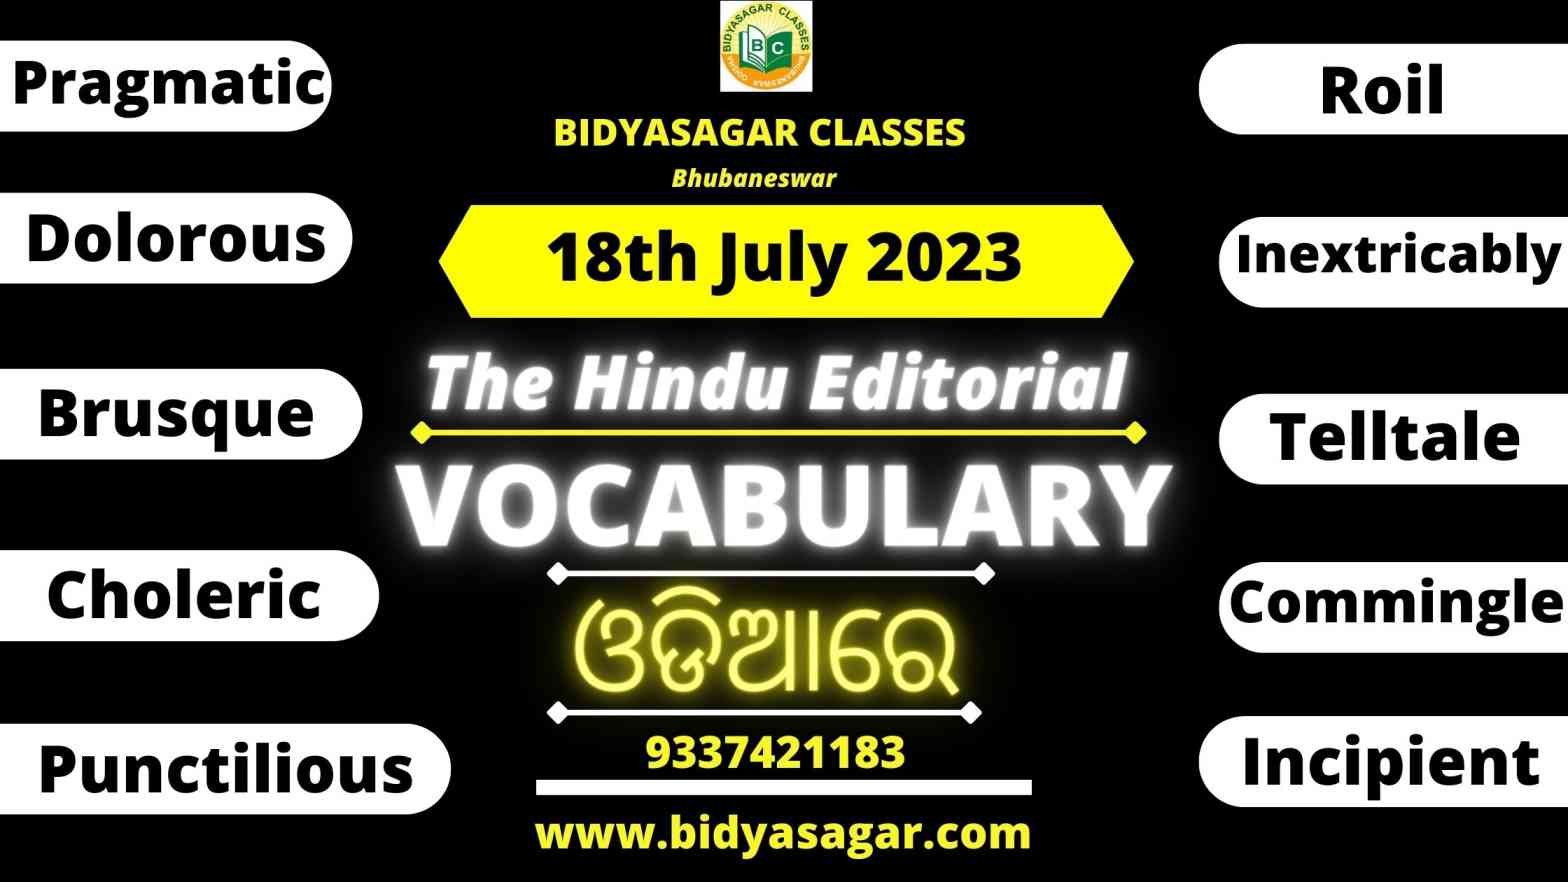 The Hindu Editorial Vocabulary of 18th July 2023